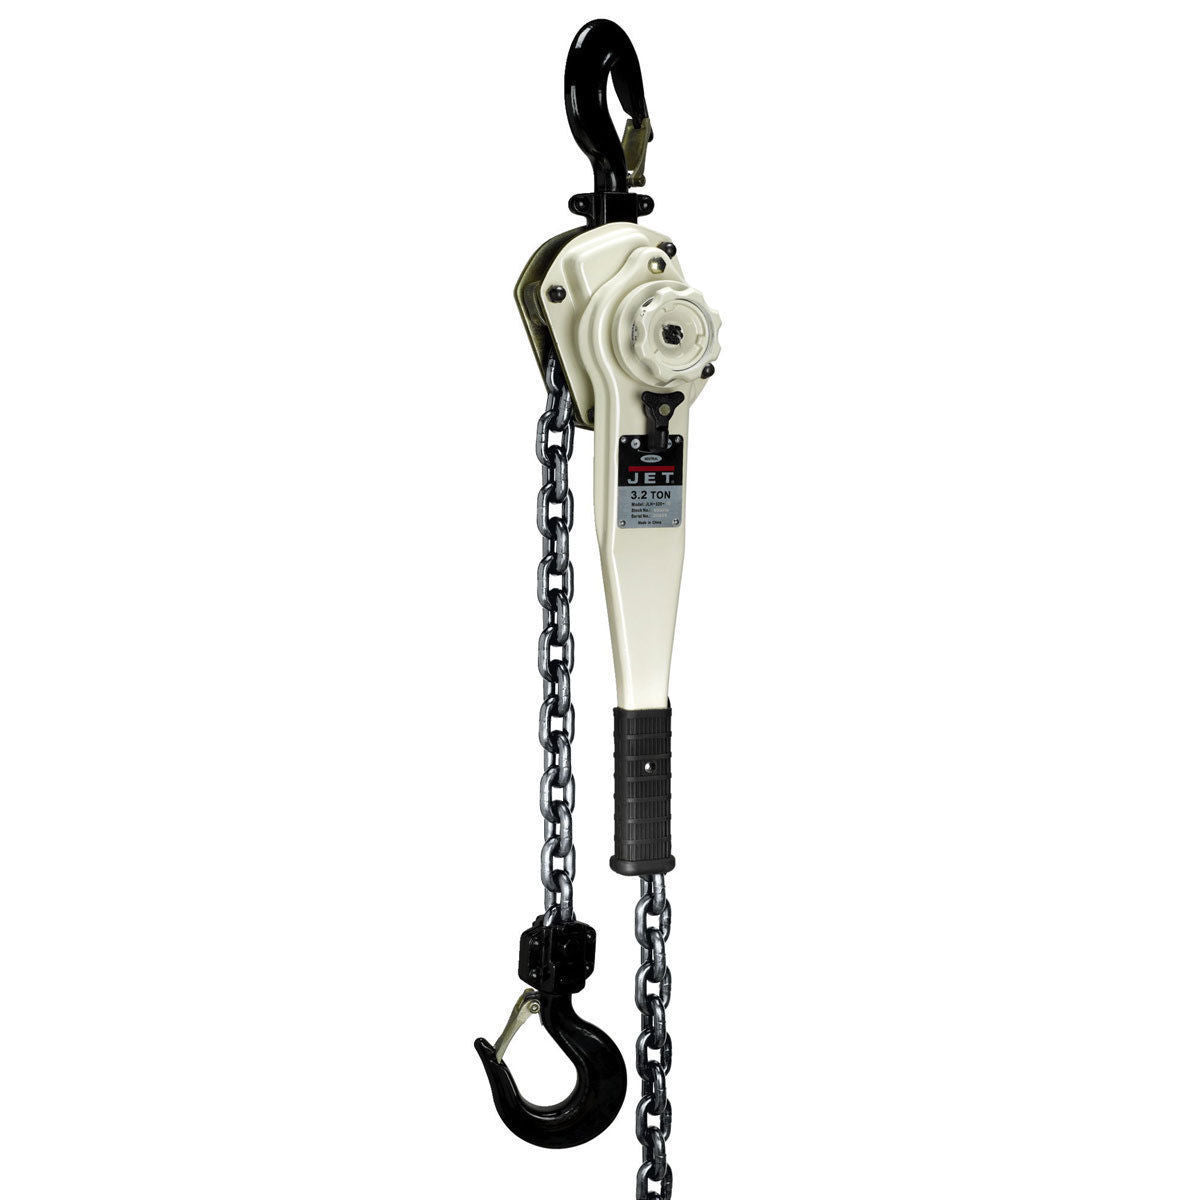 Jet 330200 JLH-320WO-20 3.2-Ton Lever Hoist With 20' Lift & Overload Protection